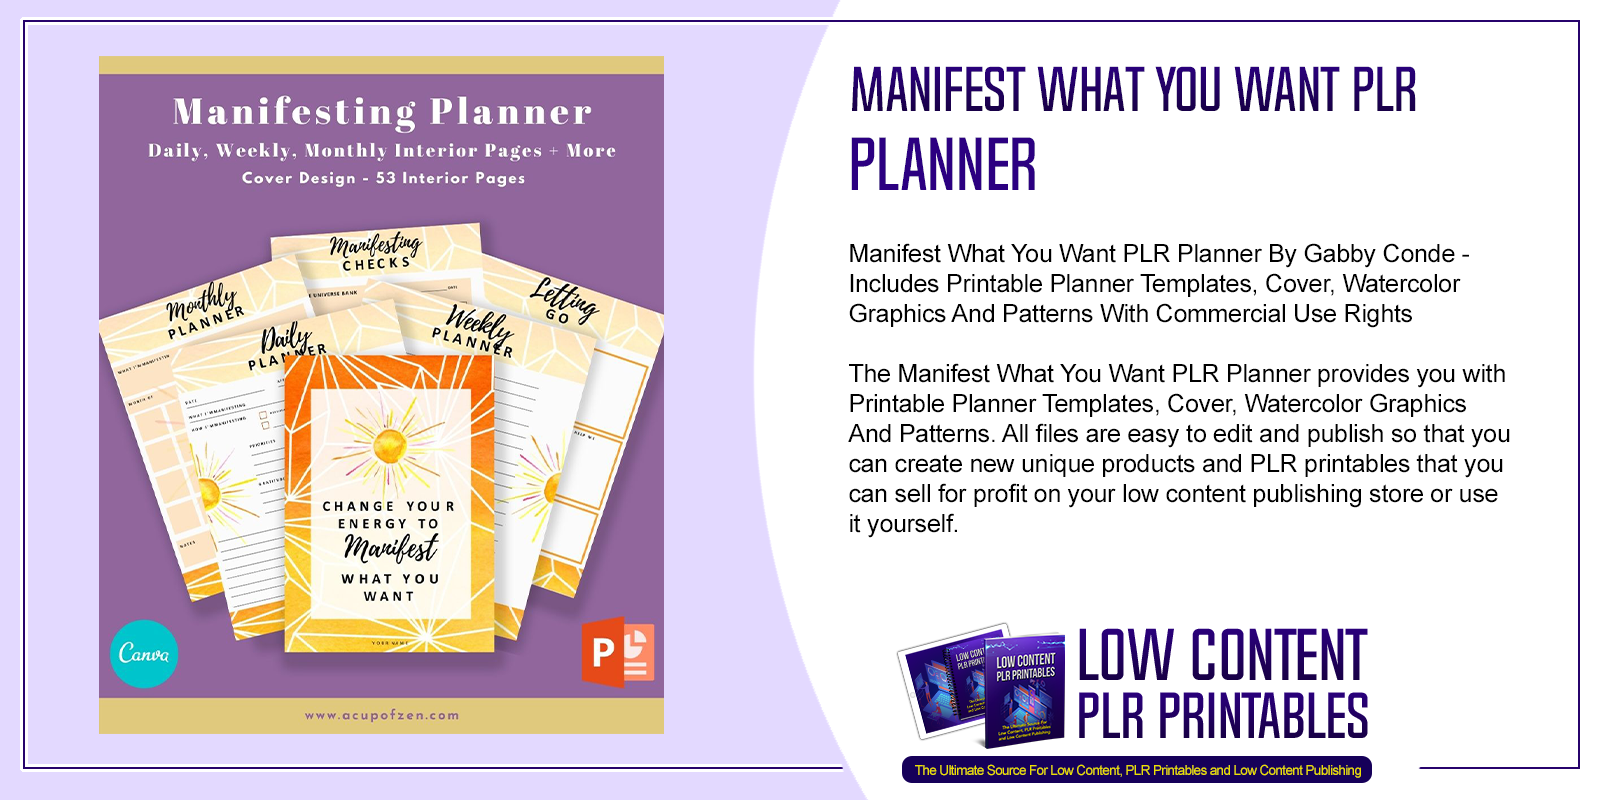 Manifest What You Want PLR Planner